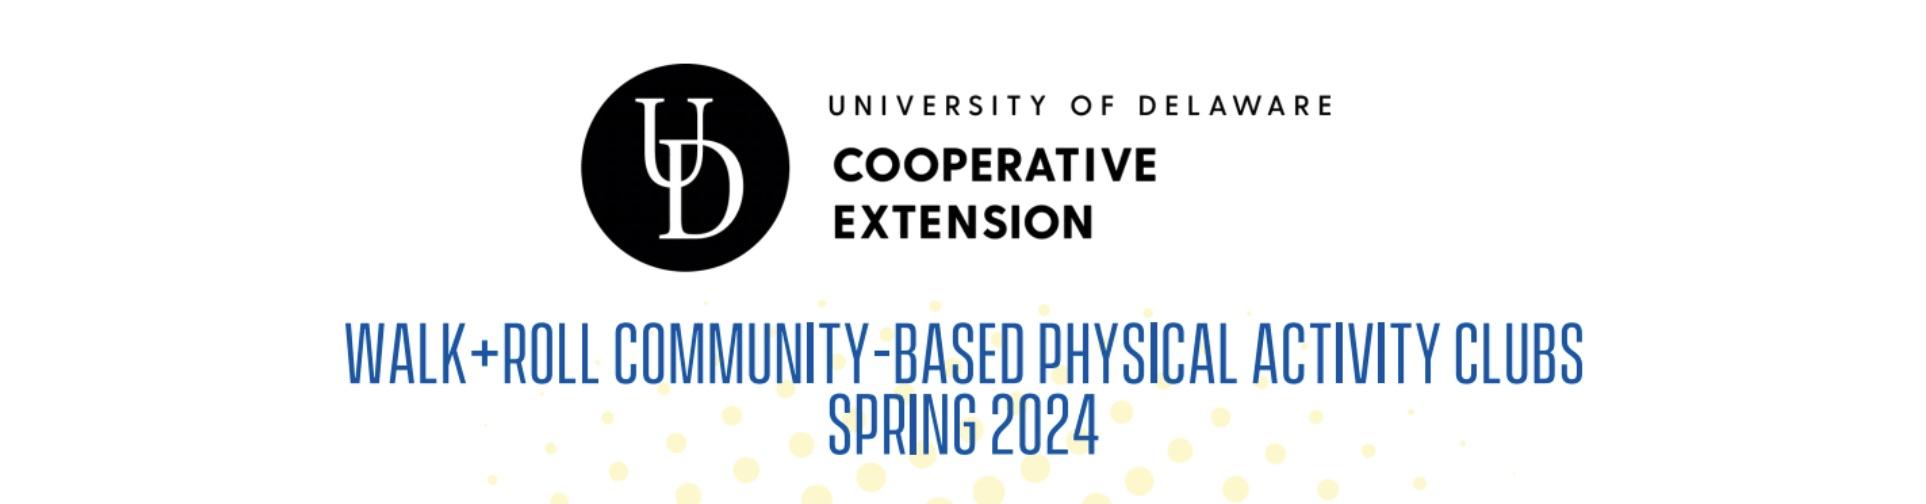 Walk+Roll Community-Based Physical Activity Clubs Spring 2024